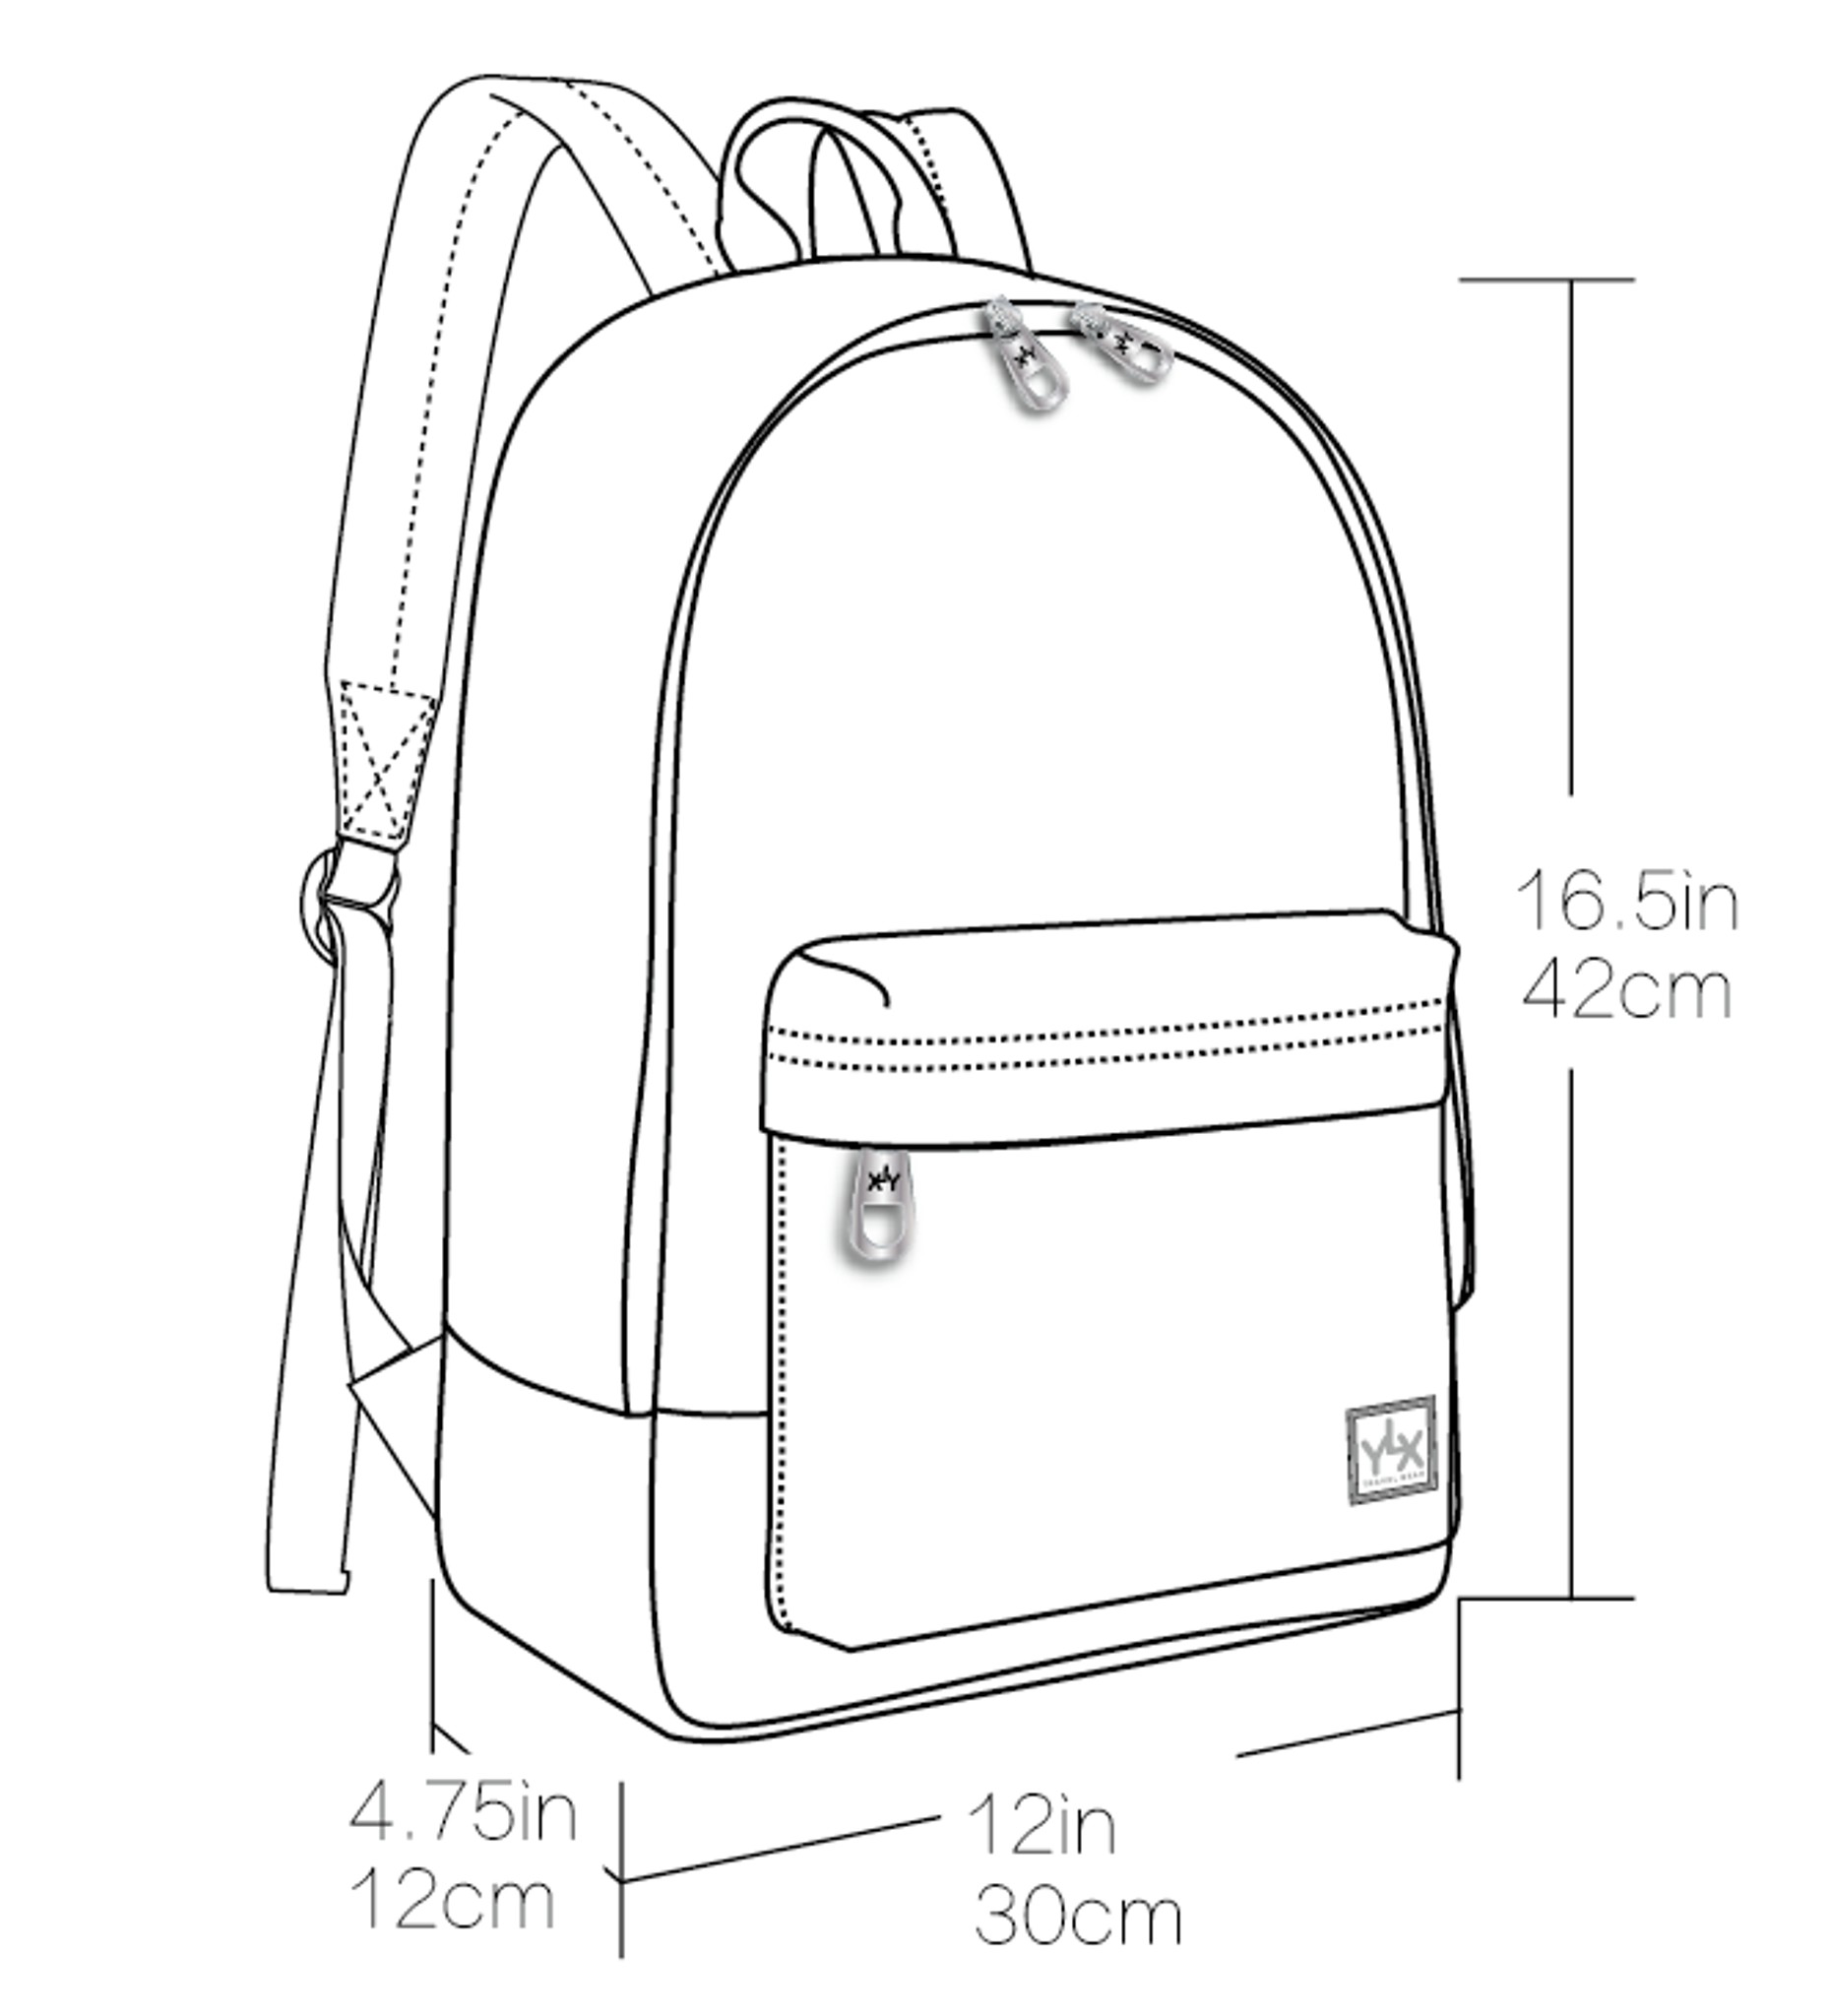 YLX Classic Backpack Dimensions